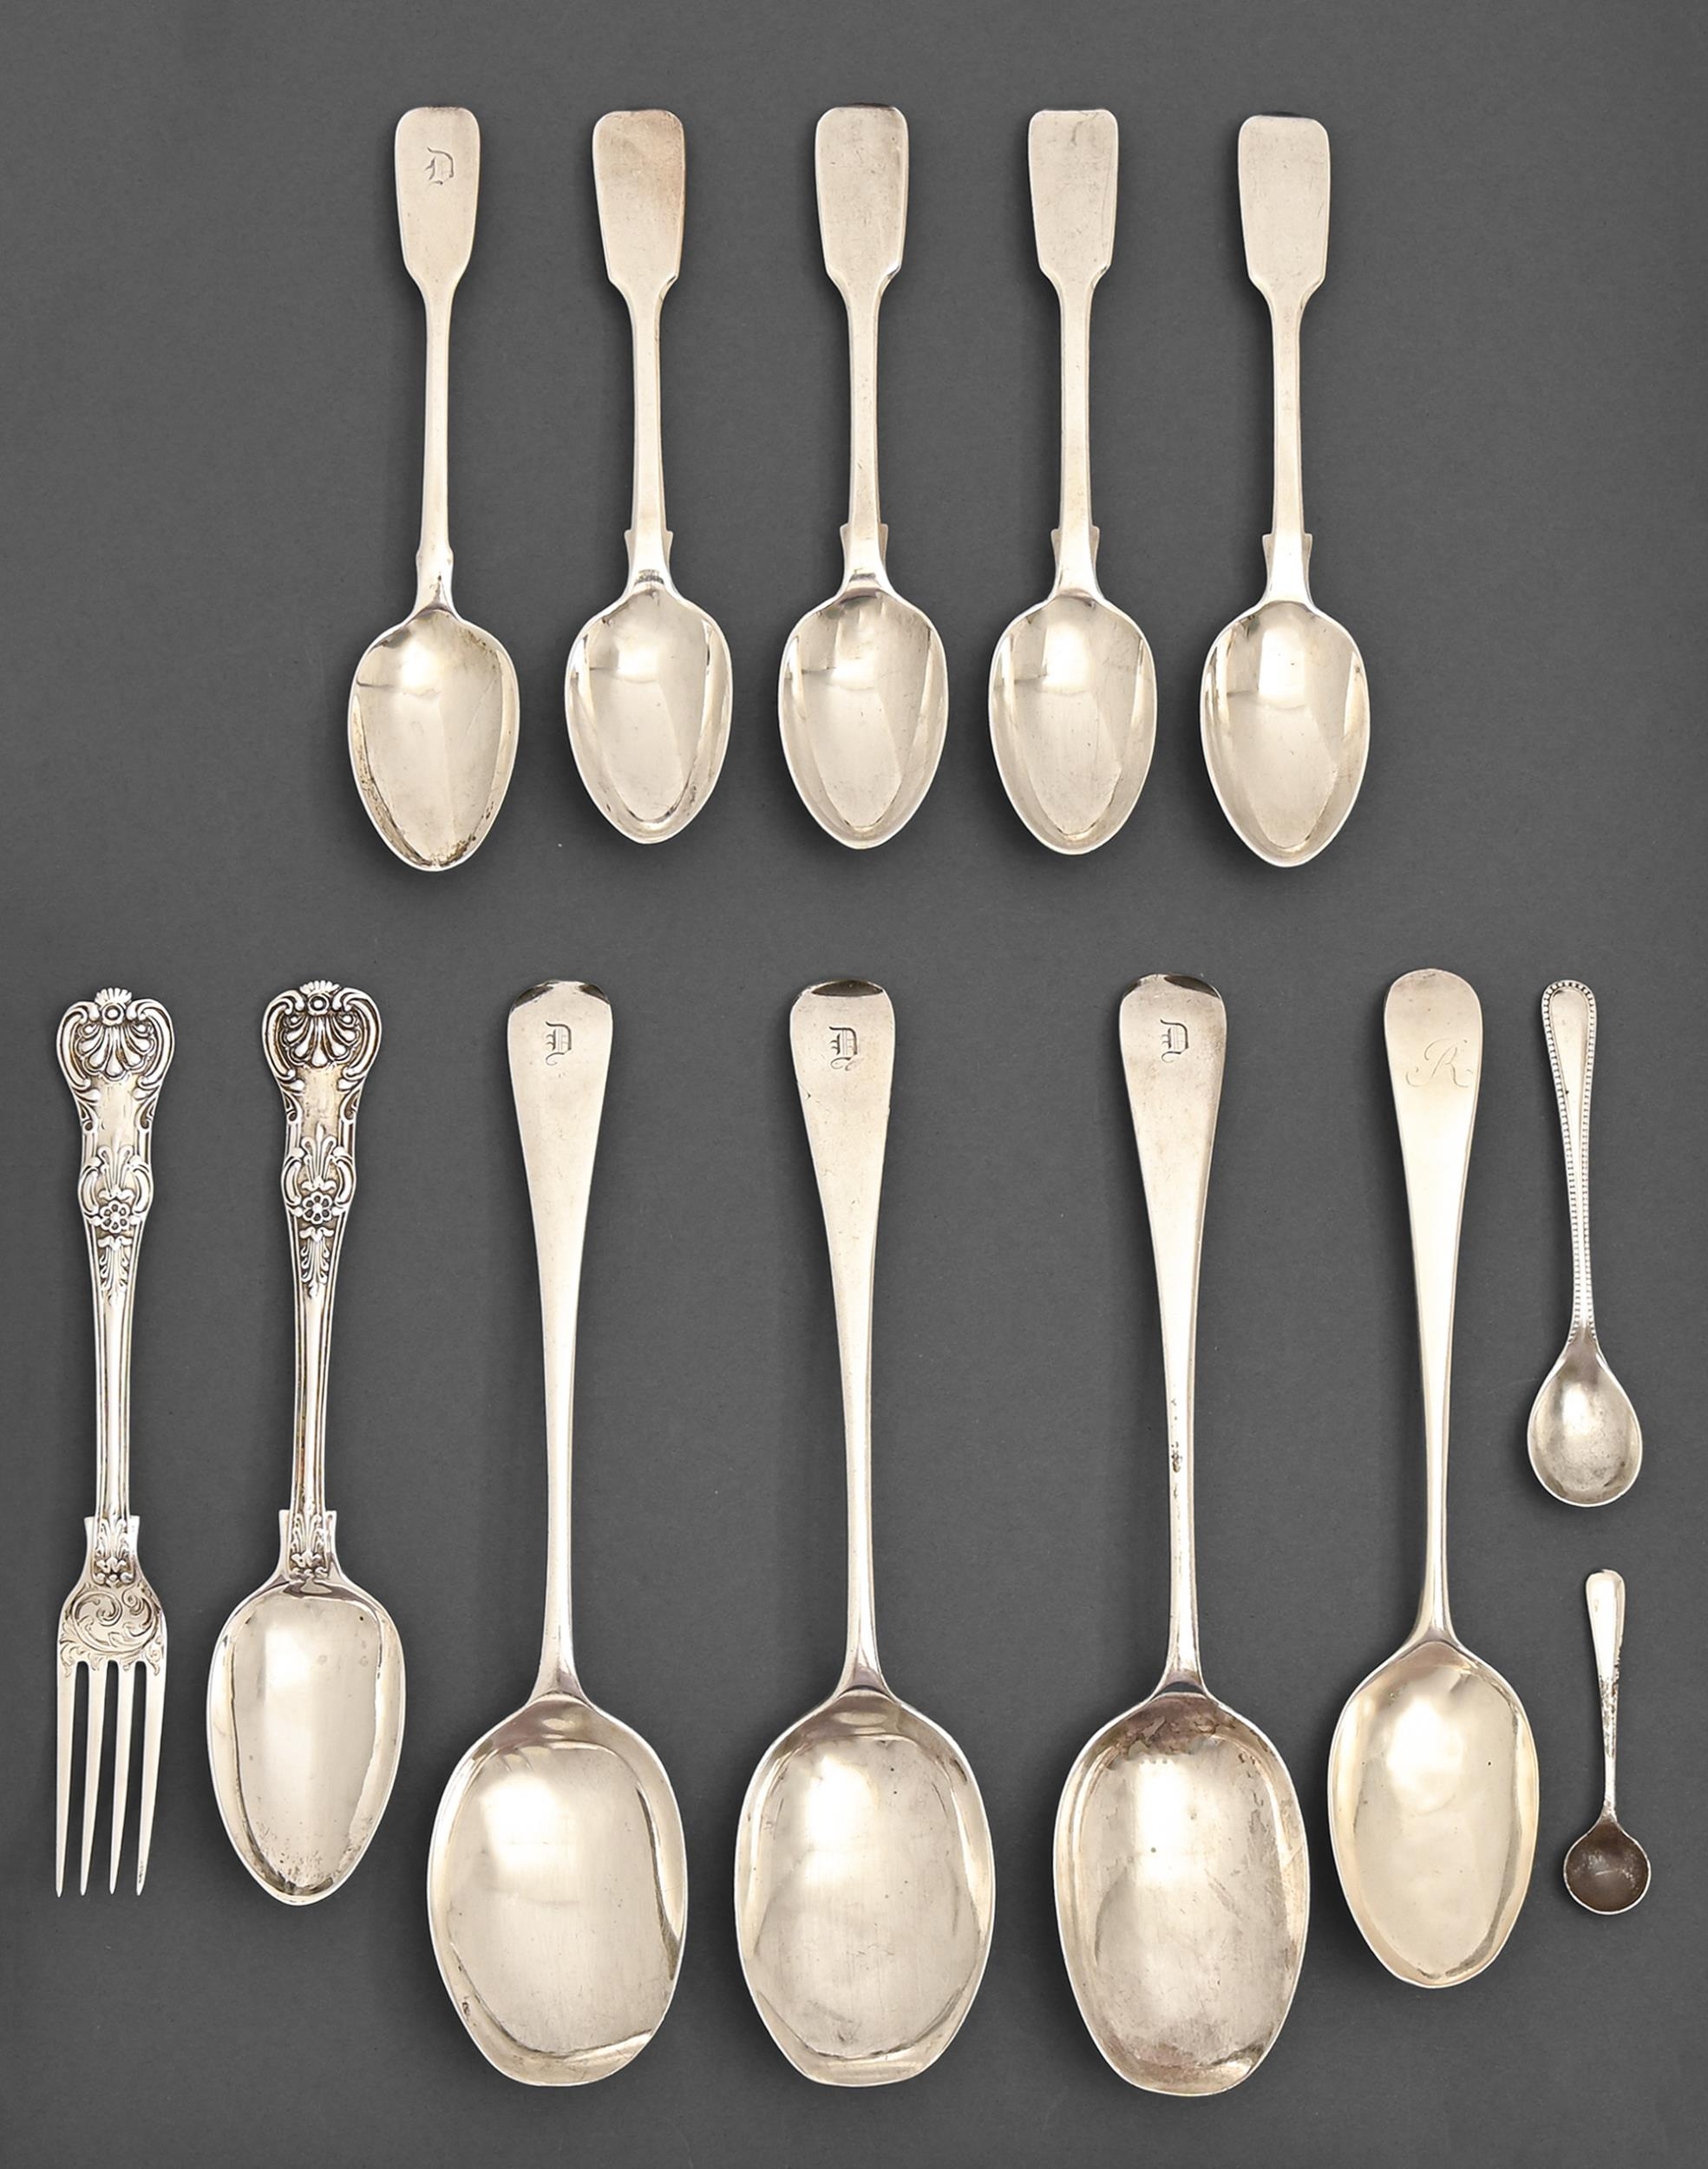 Miscellaneous silver flatware, George III - Victorian, 11ozs 14dwts Typical wear, on several items